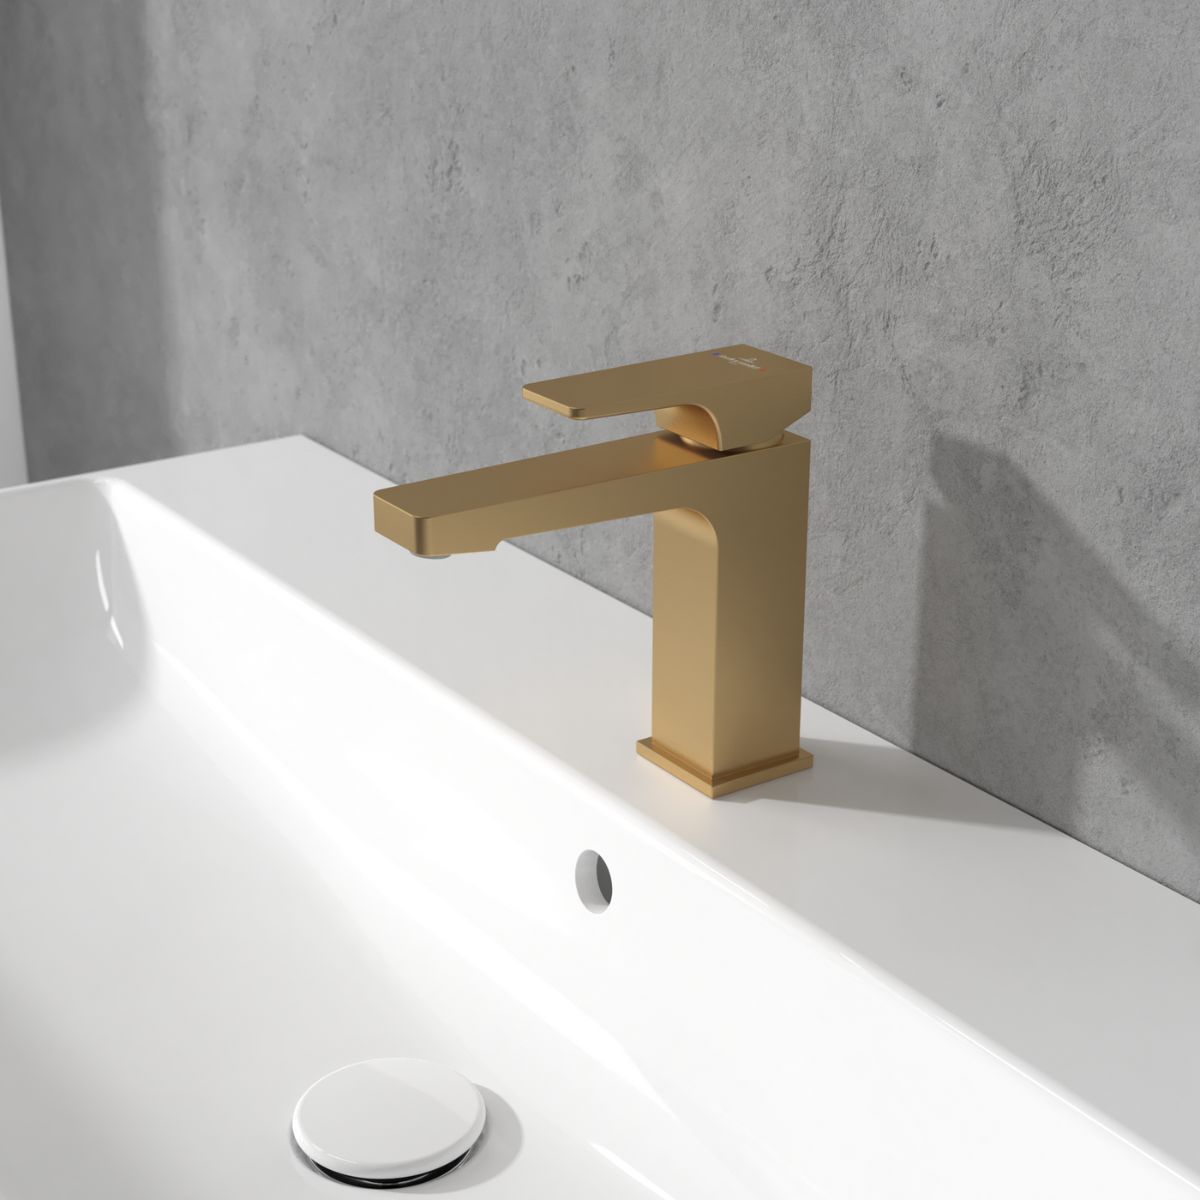 Villeroy & Boch Architectura Square Single-Lever Basin Mixer with Pop-Up Waste Brushed Gold